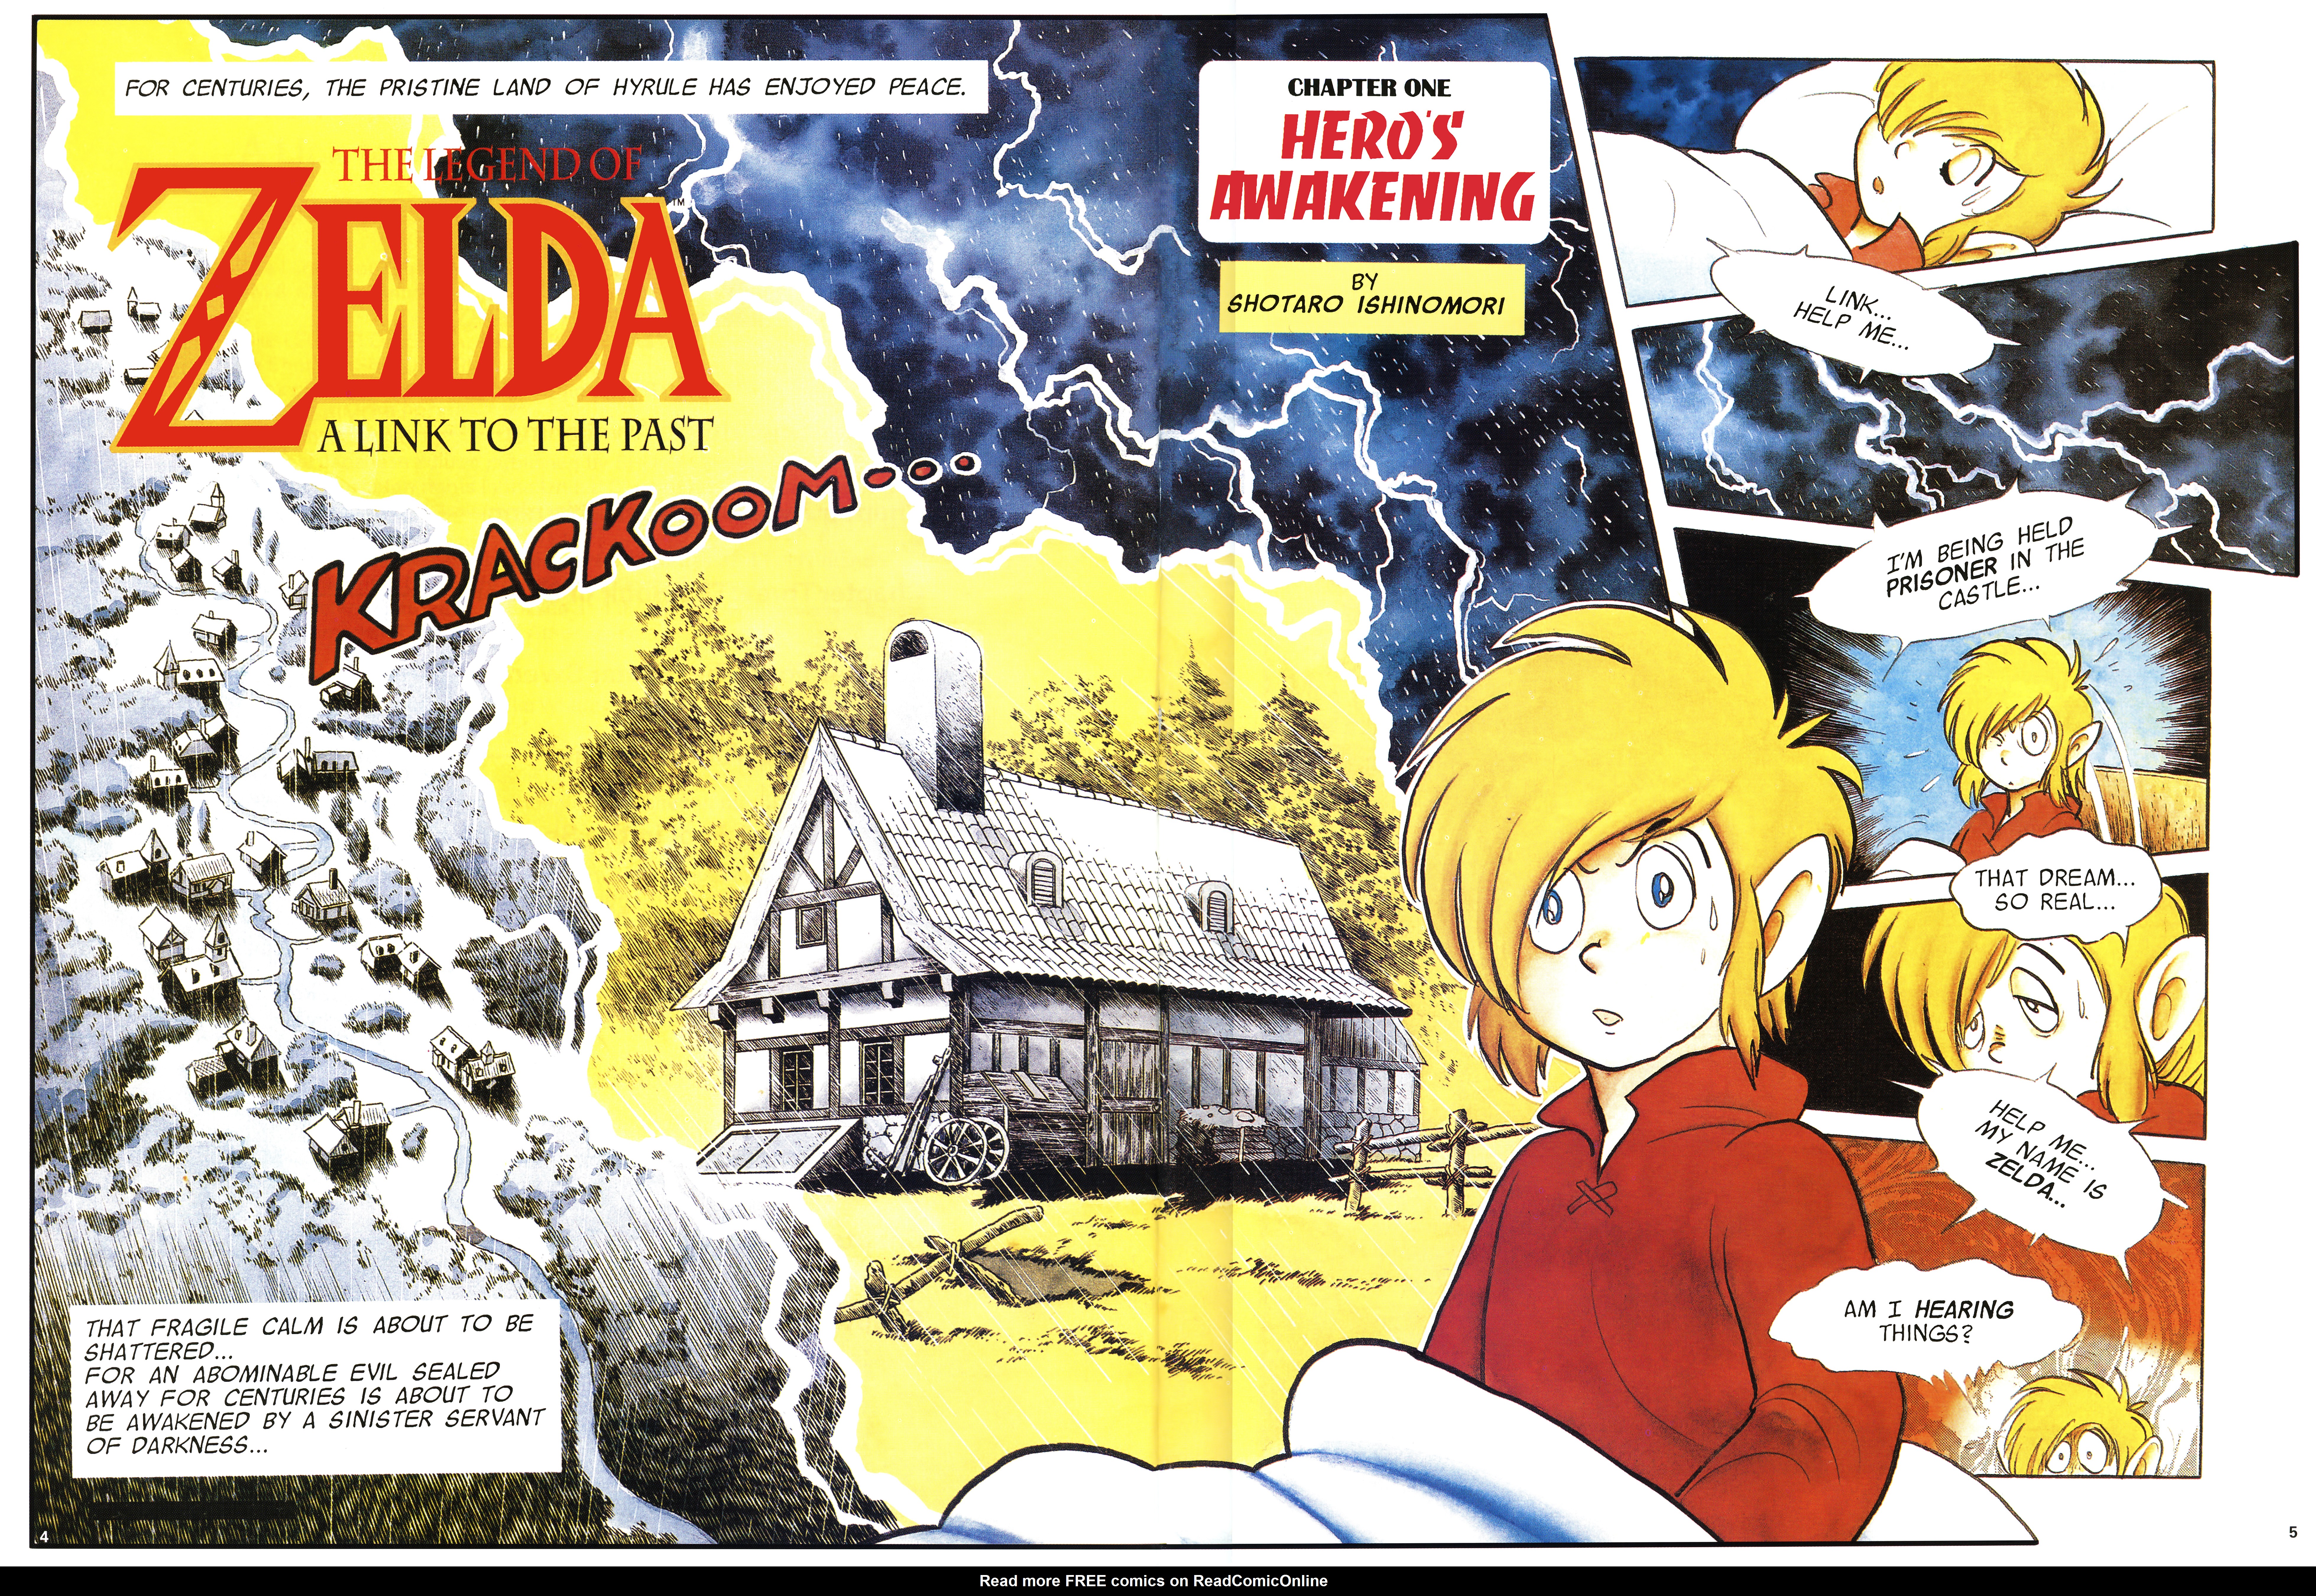 Read online The Legend of Zelda: A Link To the Past comic -  Issue # TPB (Part 1) - 5